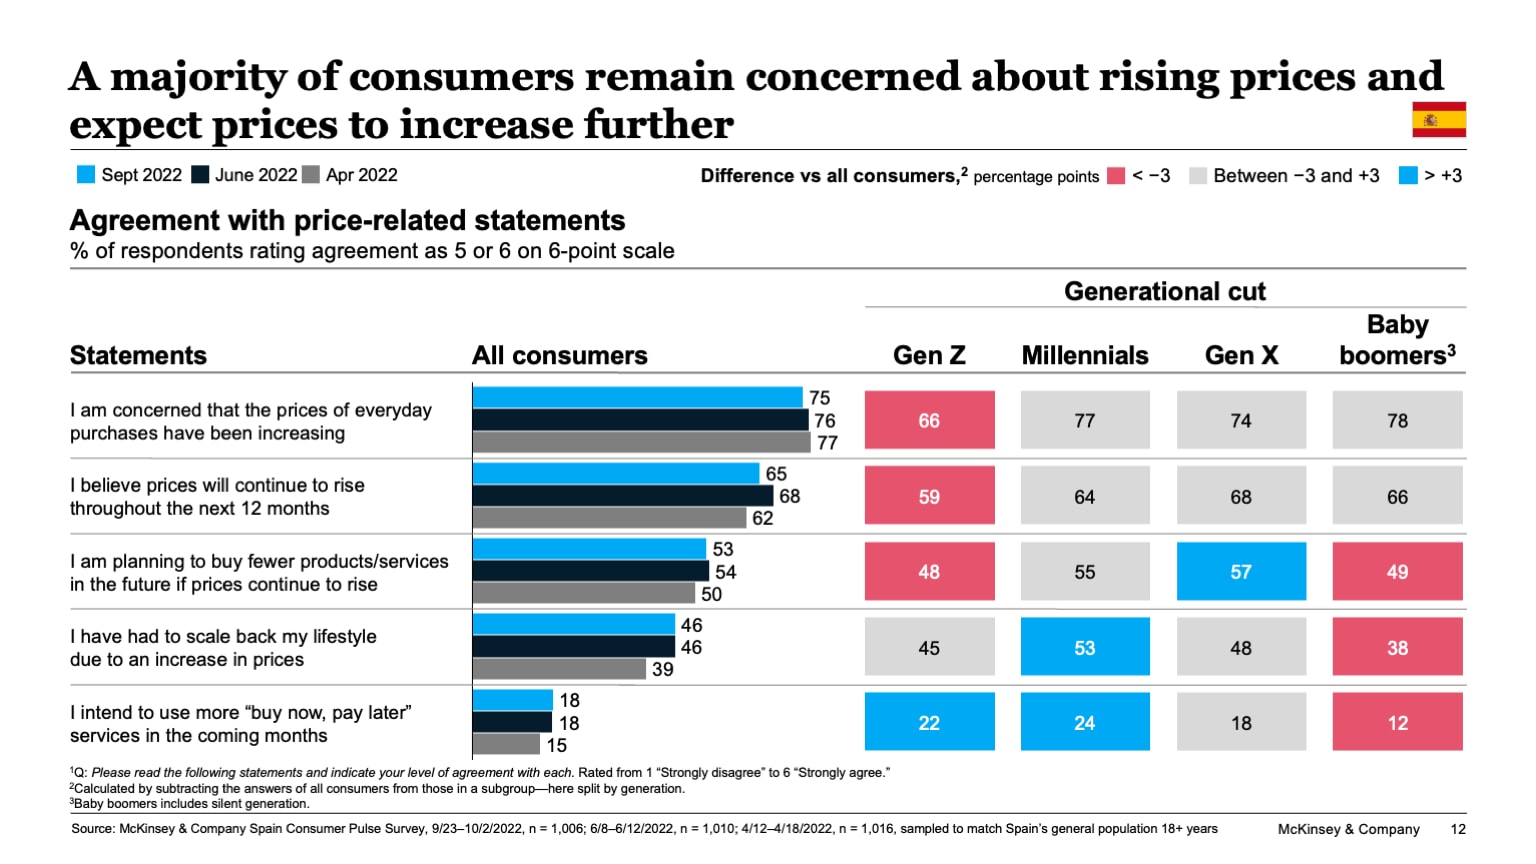 A majority of consumers remain concerned about rising prices and expect prices to increase further